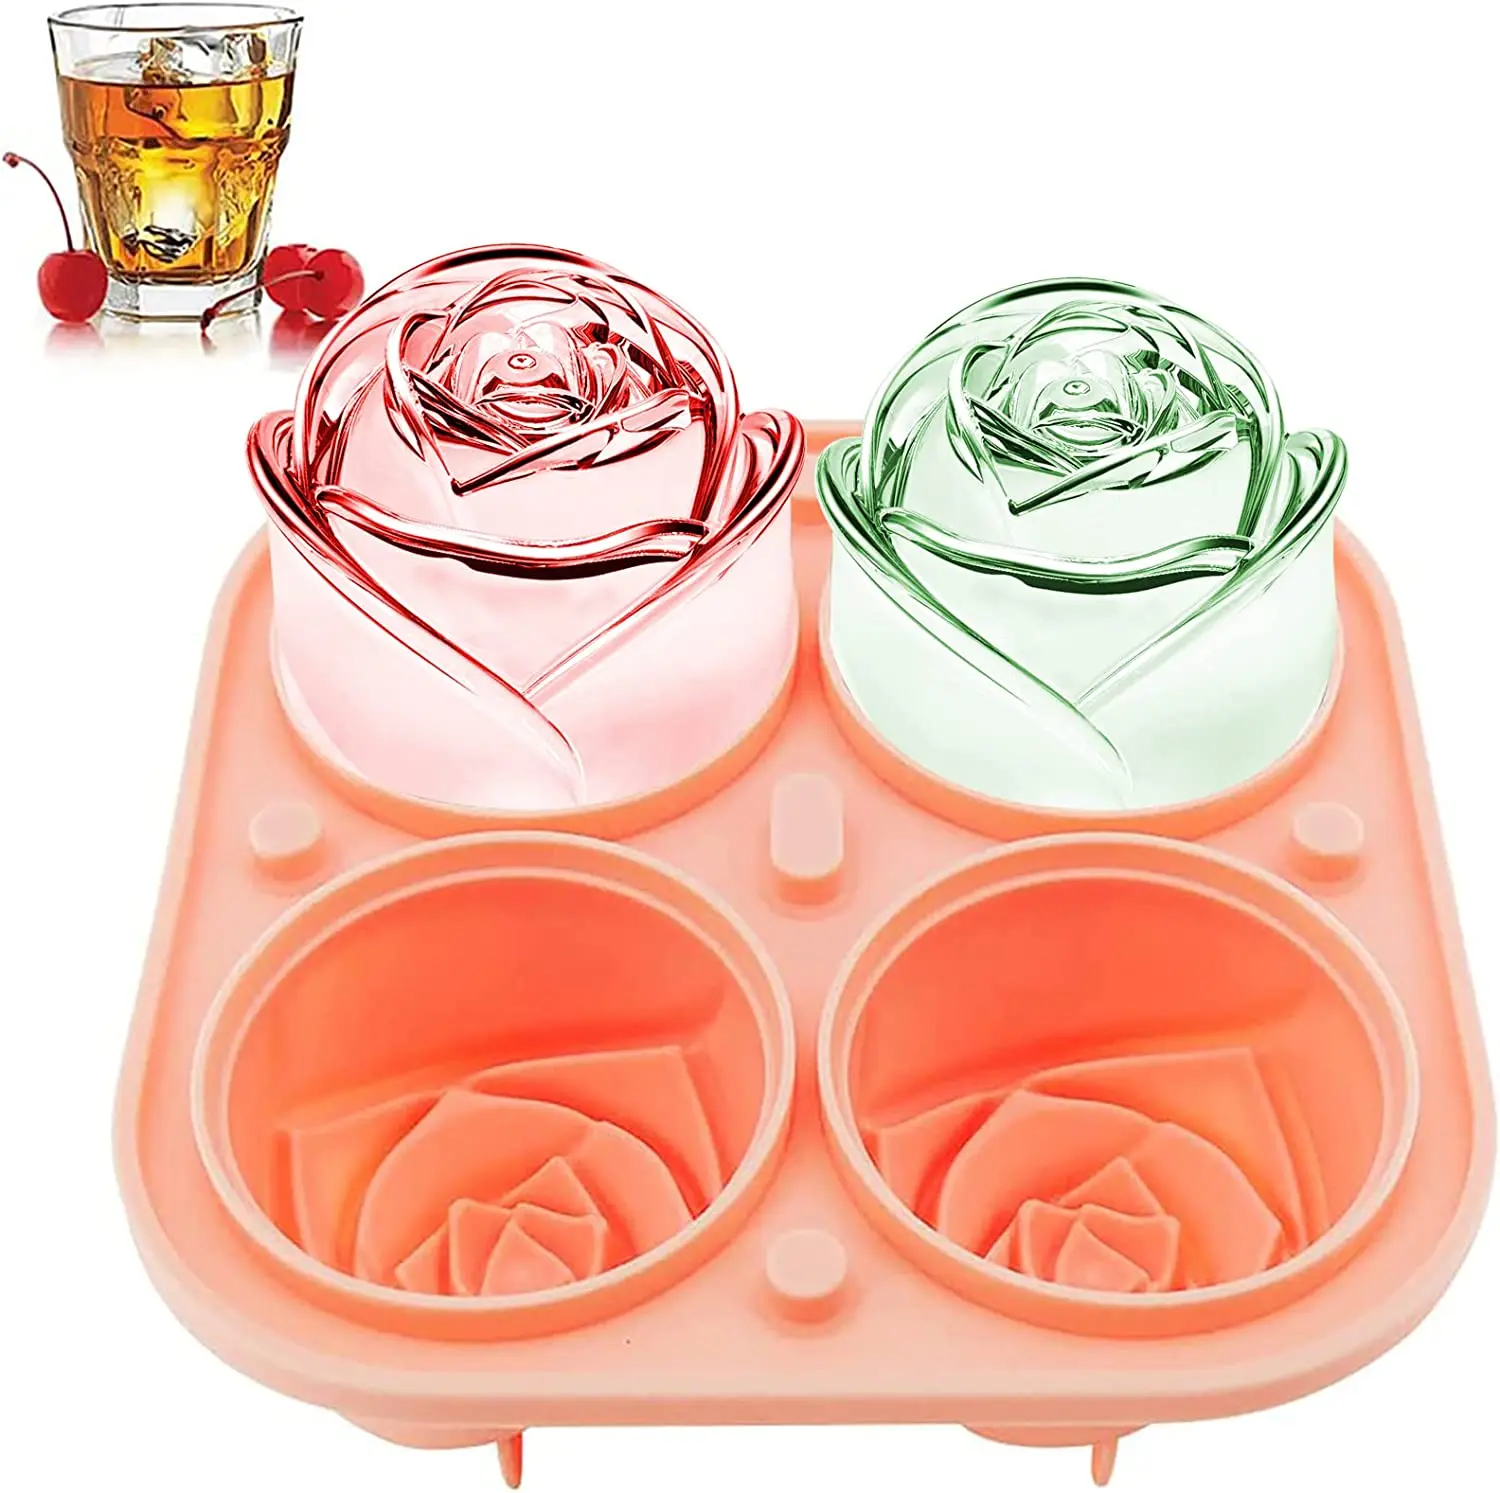 

3D Rose Ice Cube Trays 2.5inch Silicone 4 Grids Ice Cubes Mold with Funnel-Shaped Lid Reusable Frozen Mold for Whiskey Cocktails